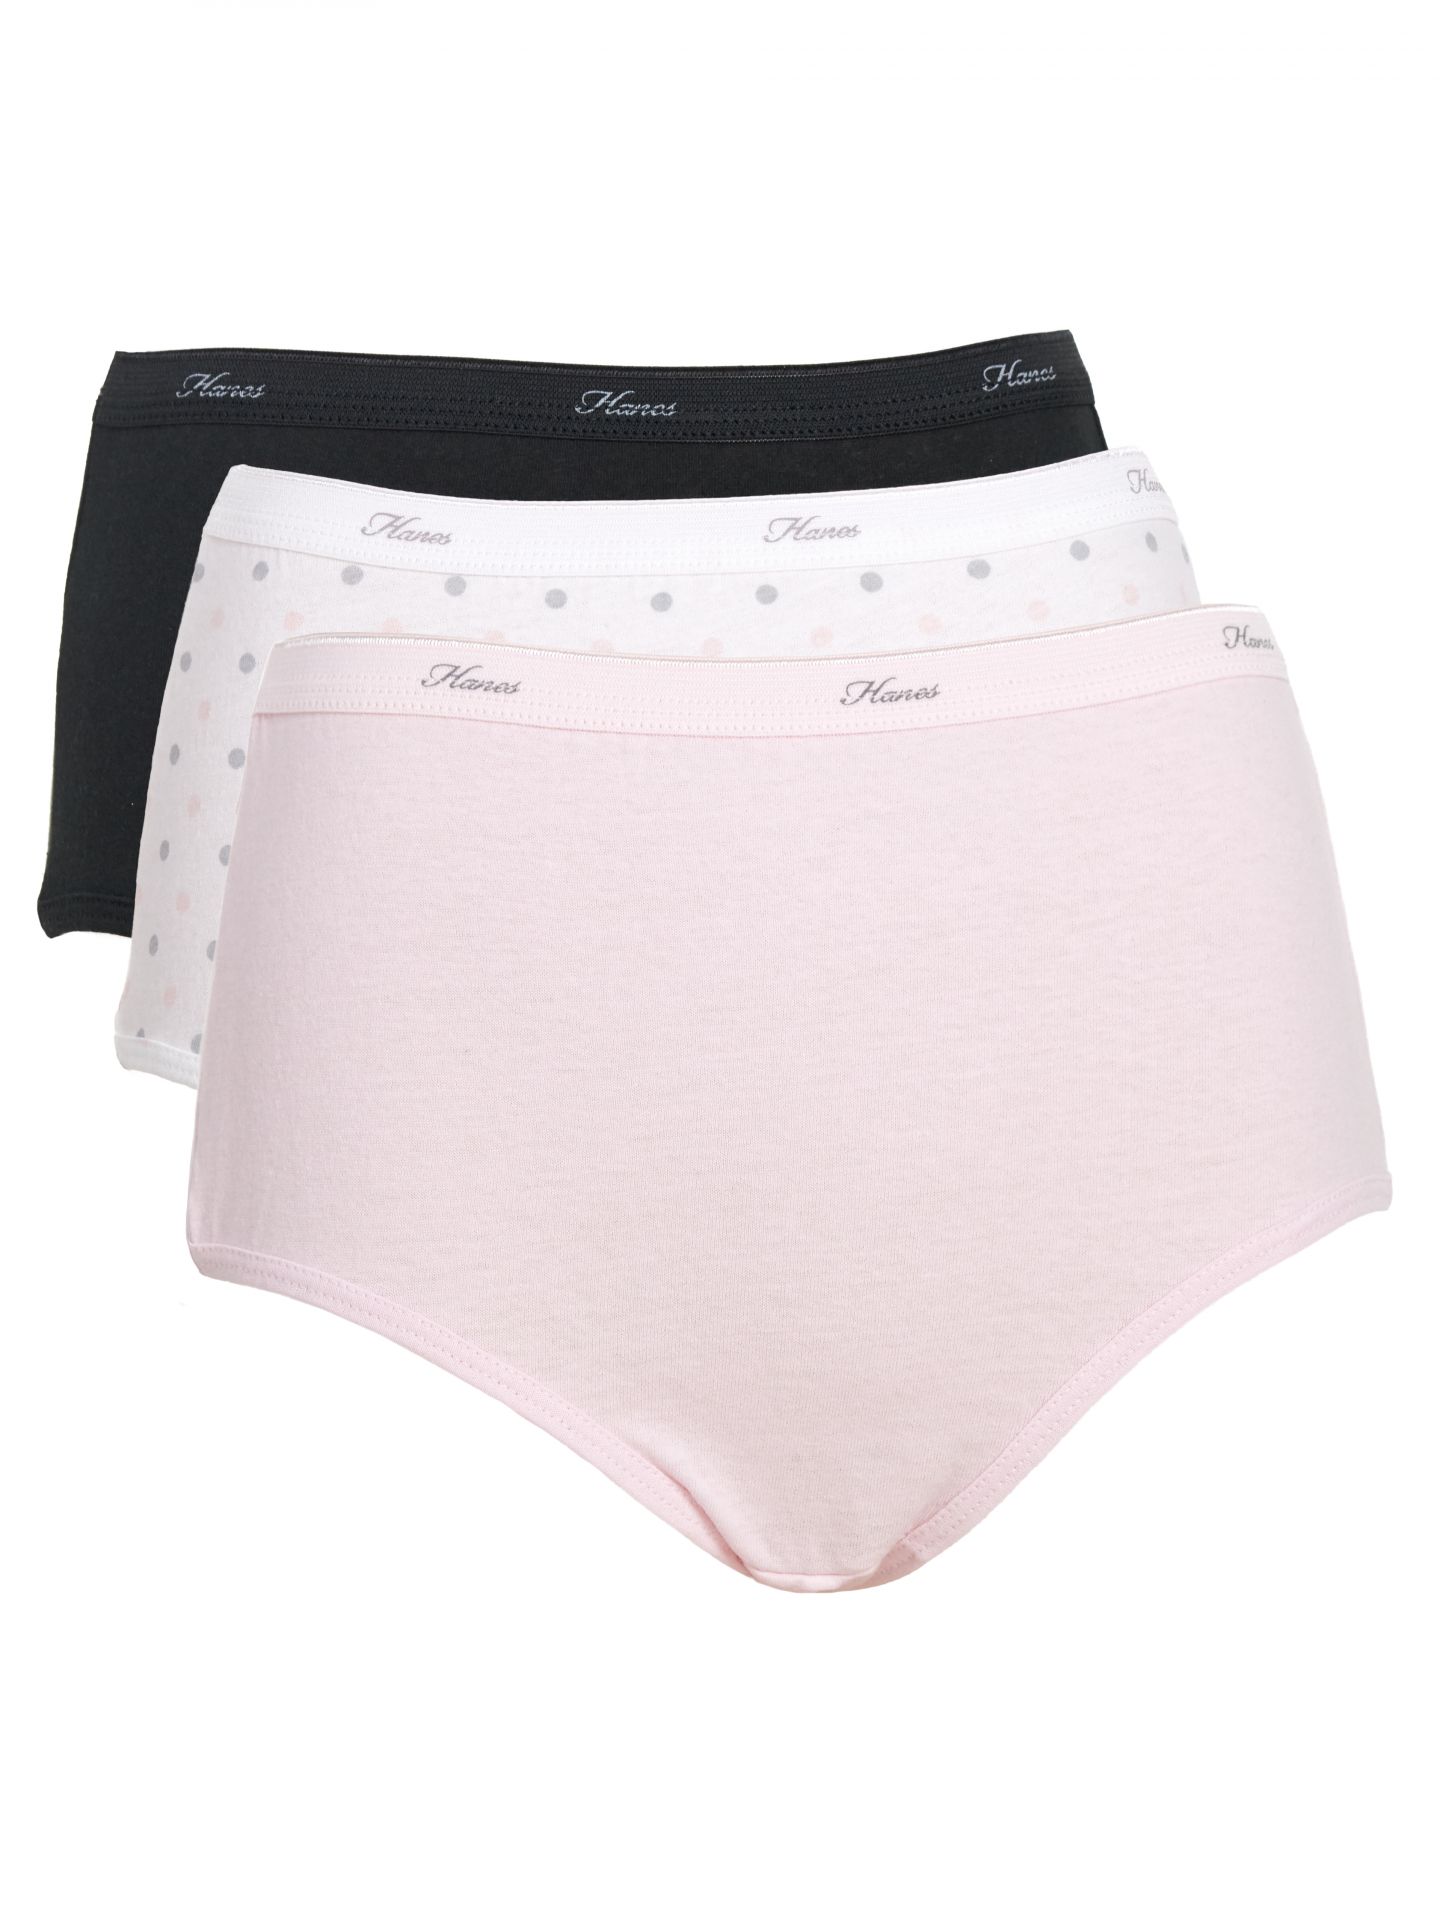 Hanes Women's Classic Cotton Brief Panties, #CW40 (Pack of 3)